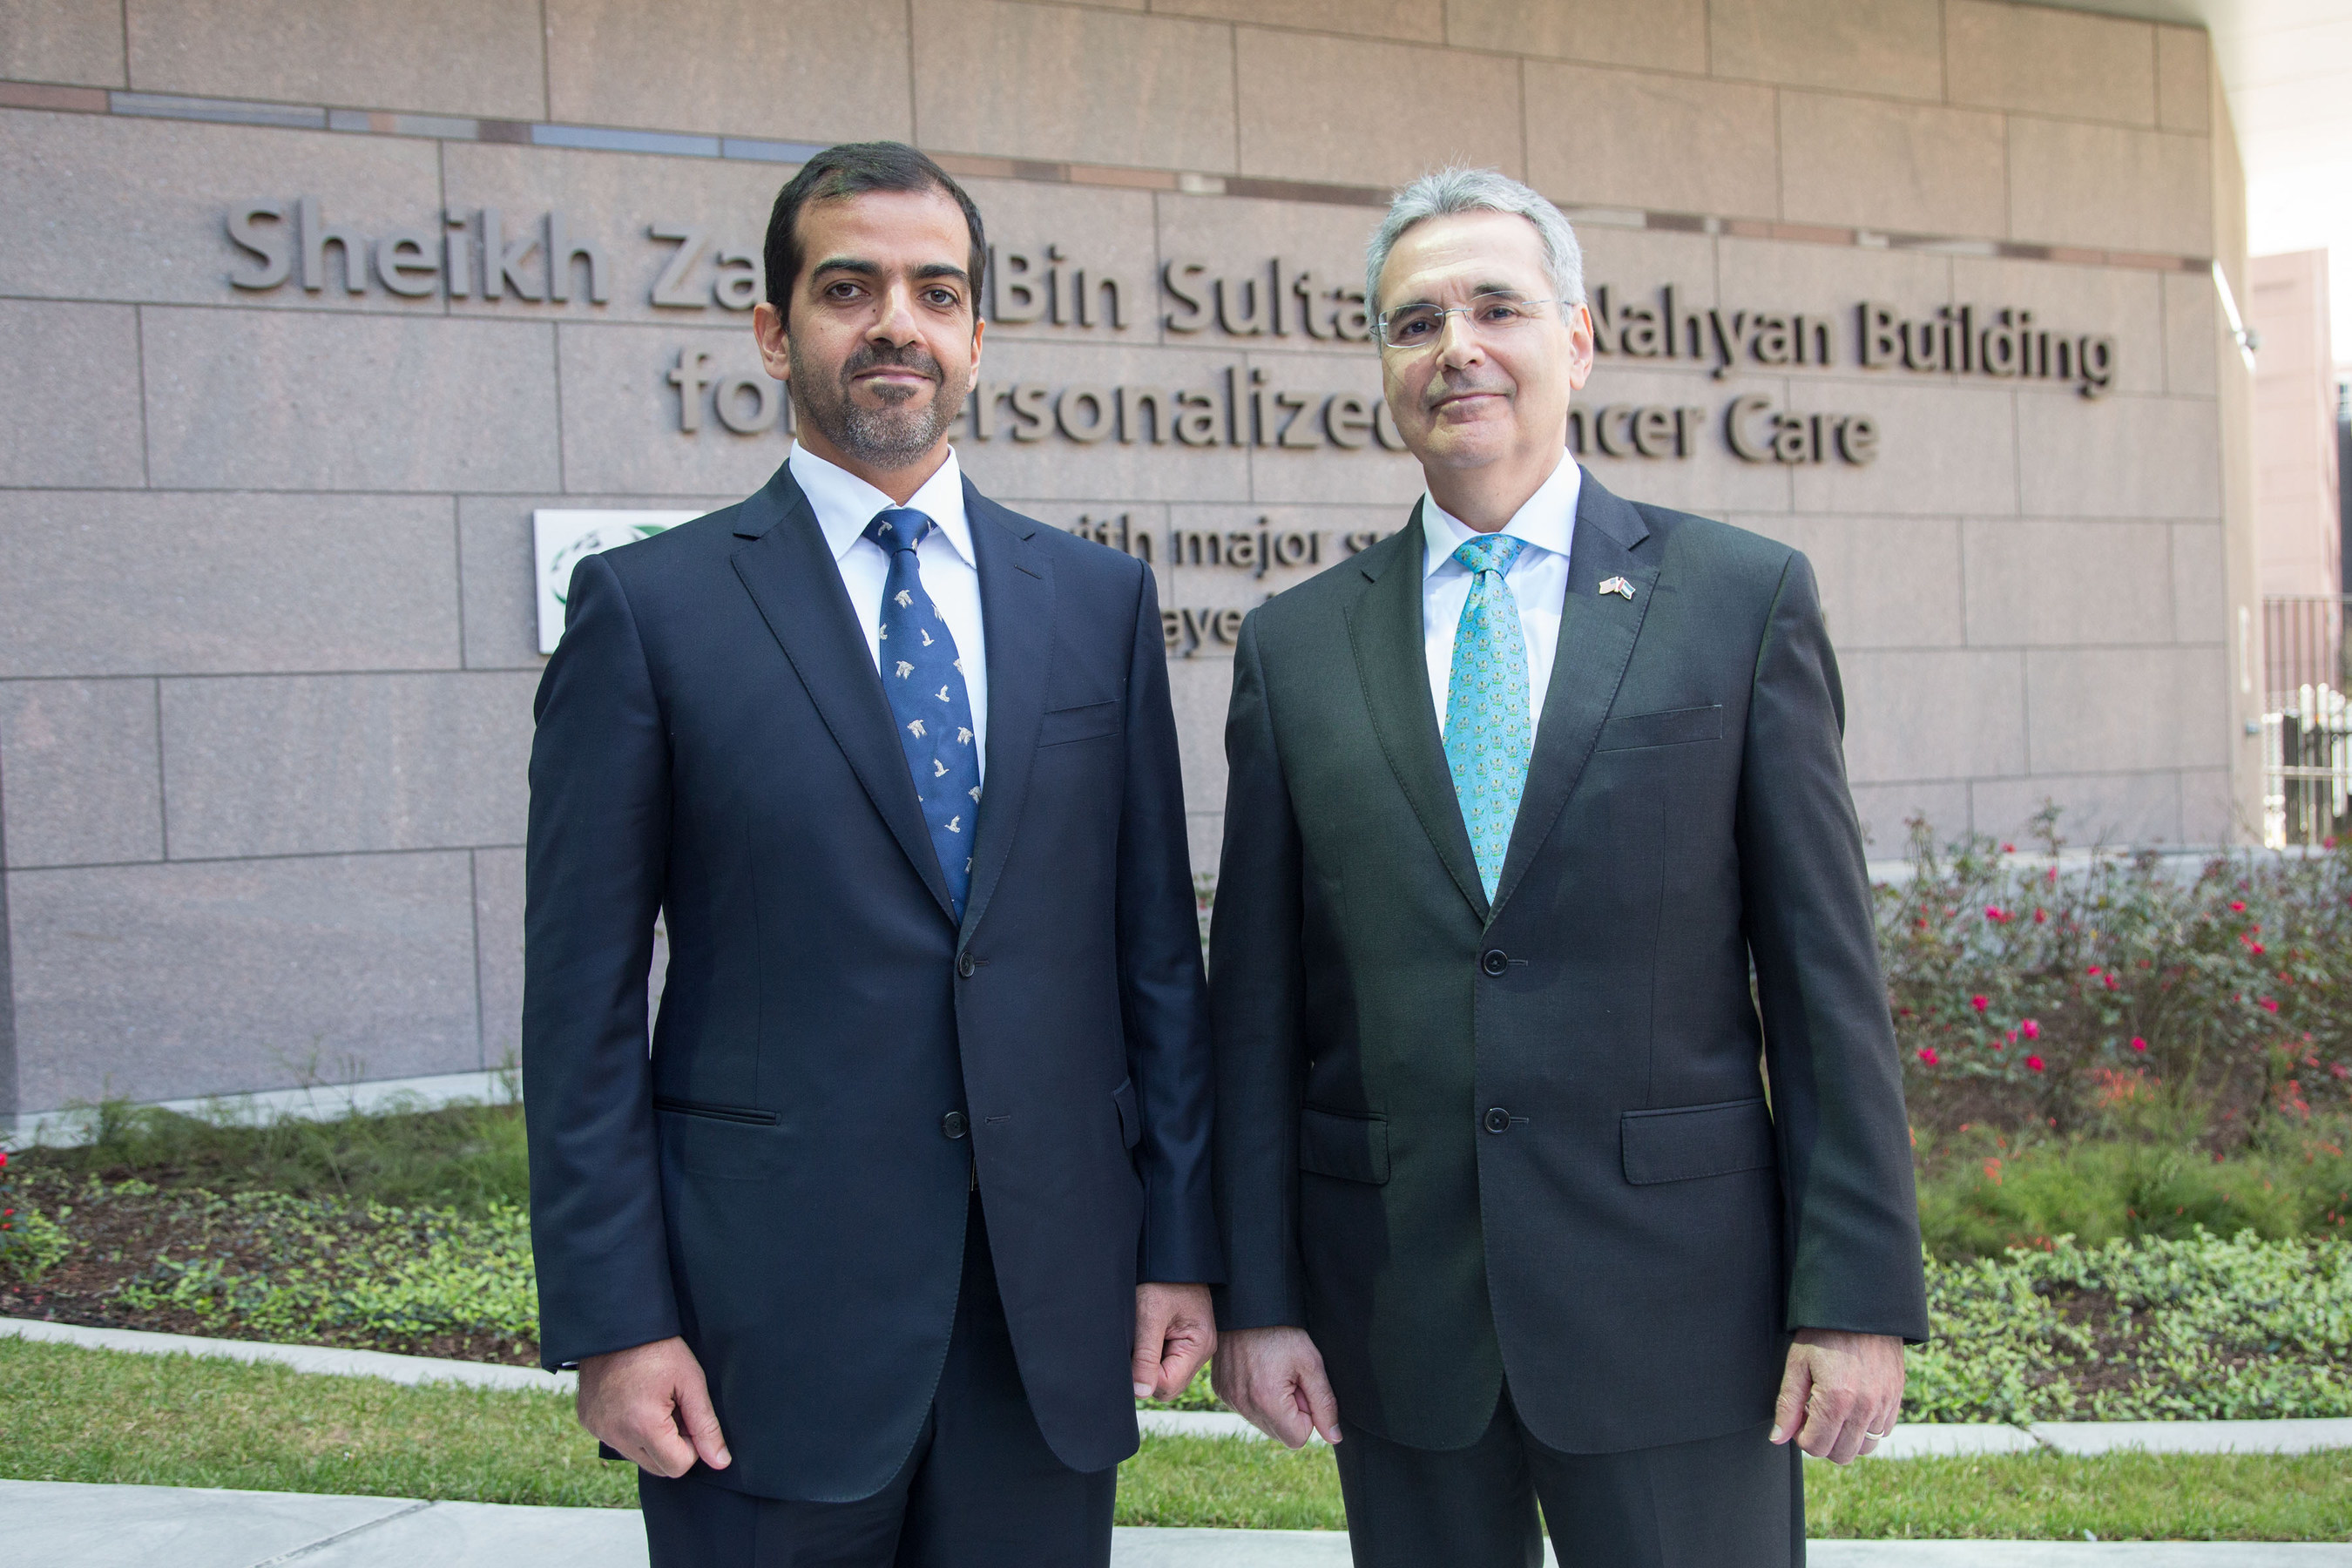 His Highness Sheikh Hamed Bin Zayed Al Nahyan, Chairman of the Crown Prince Court of Abu Dhabi, left, and Ronald A. DePinho, President, The Universty of Texas D Andreson Cancer Center, pose for a photo in front of the Sheikh Zayed Bin Sultan Al Nahyan Building for Personalized Cancer Care, after the center was dedicated Friday, April 8, 2016